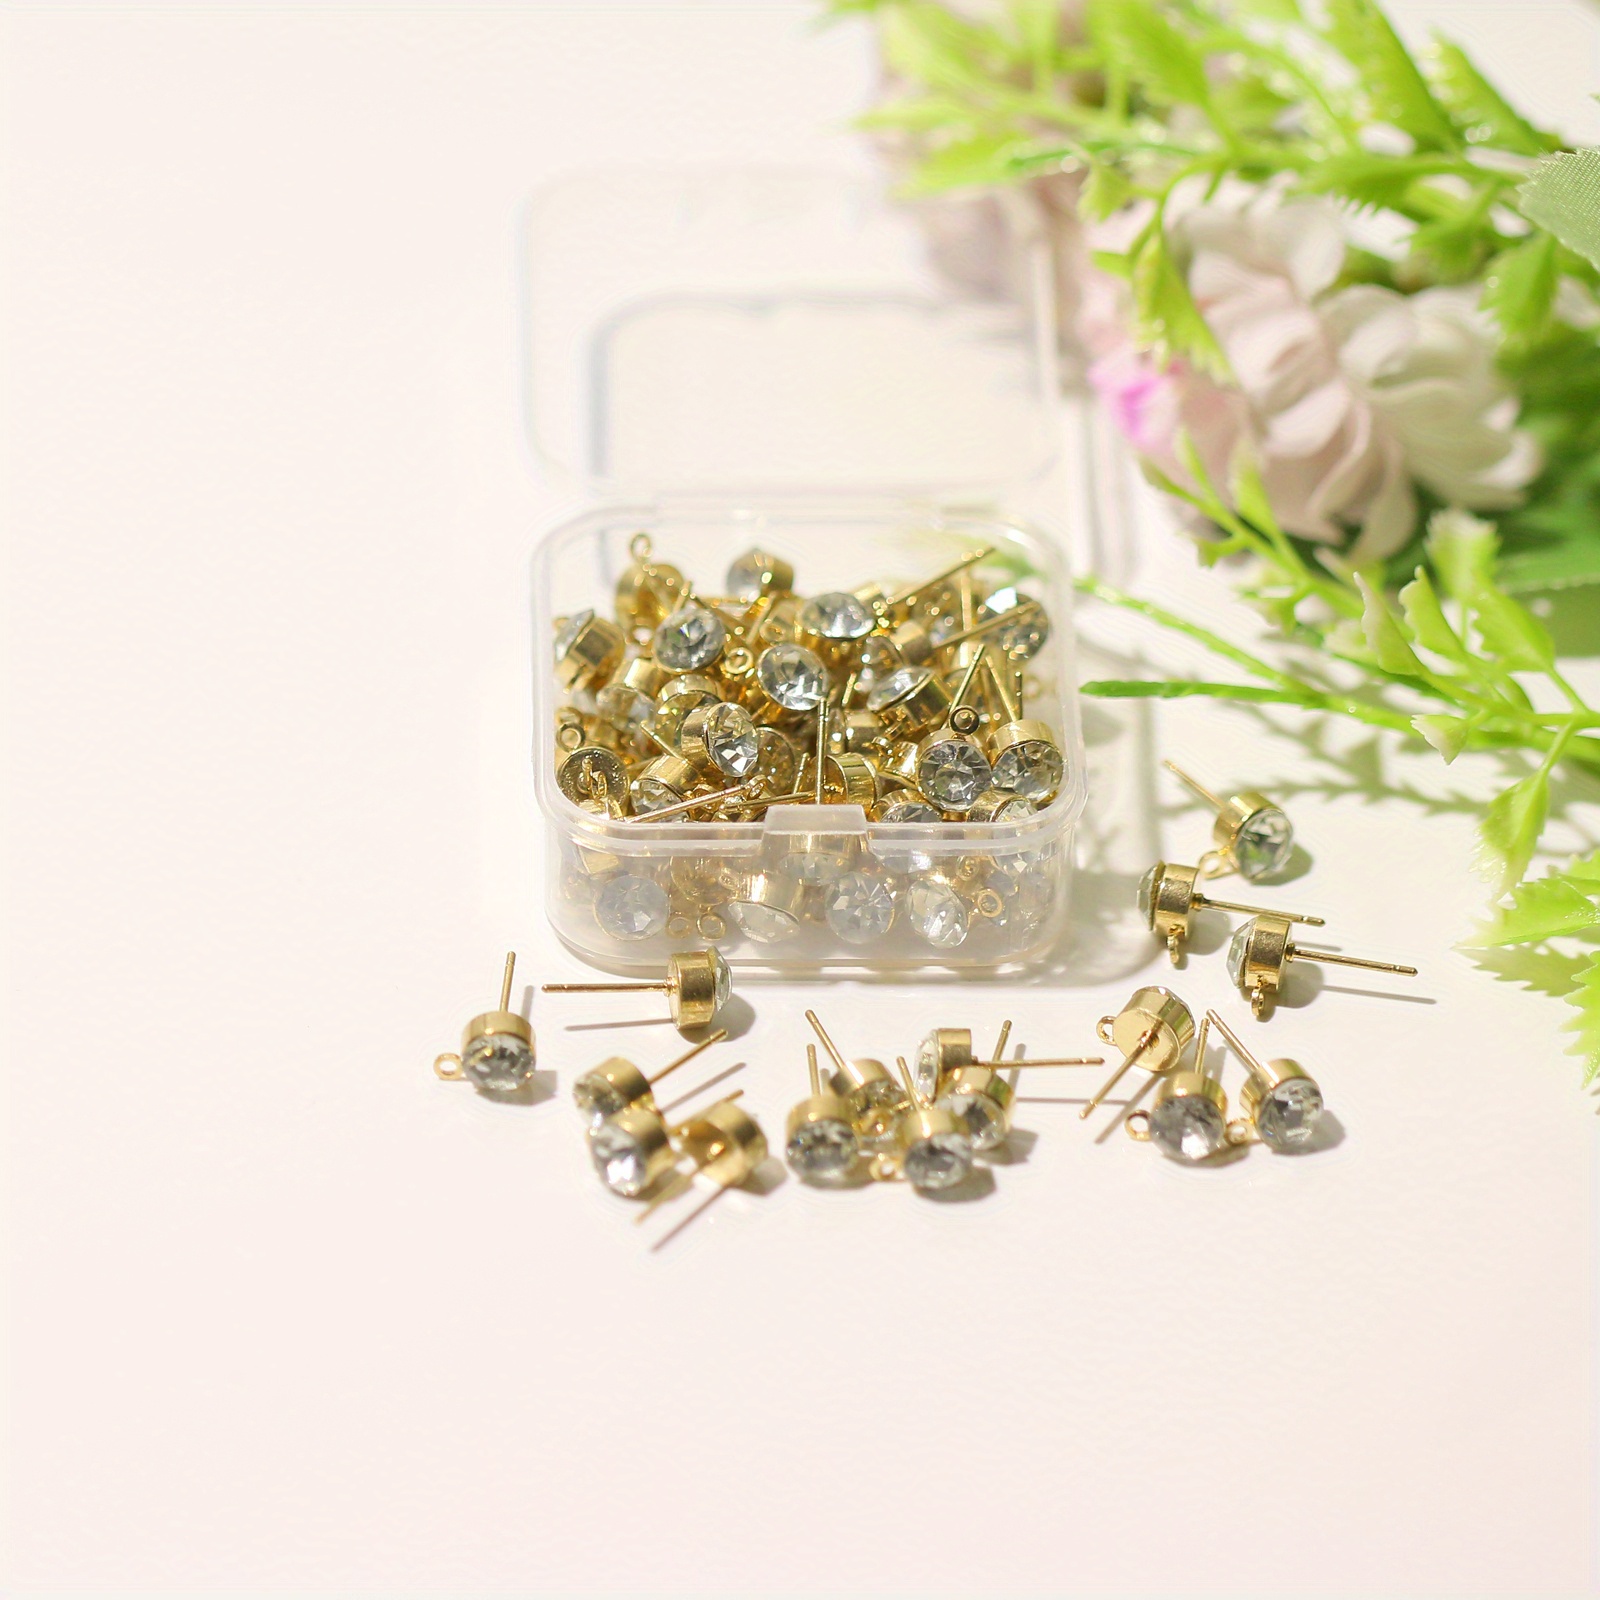 

10pcs/50pcs Stud Earrings Inlaid Rhinestones With Hanging Loops For Diy Earrings Making Jewelry Accessories With Pp Storage Box